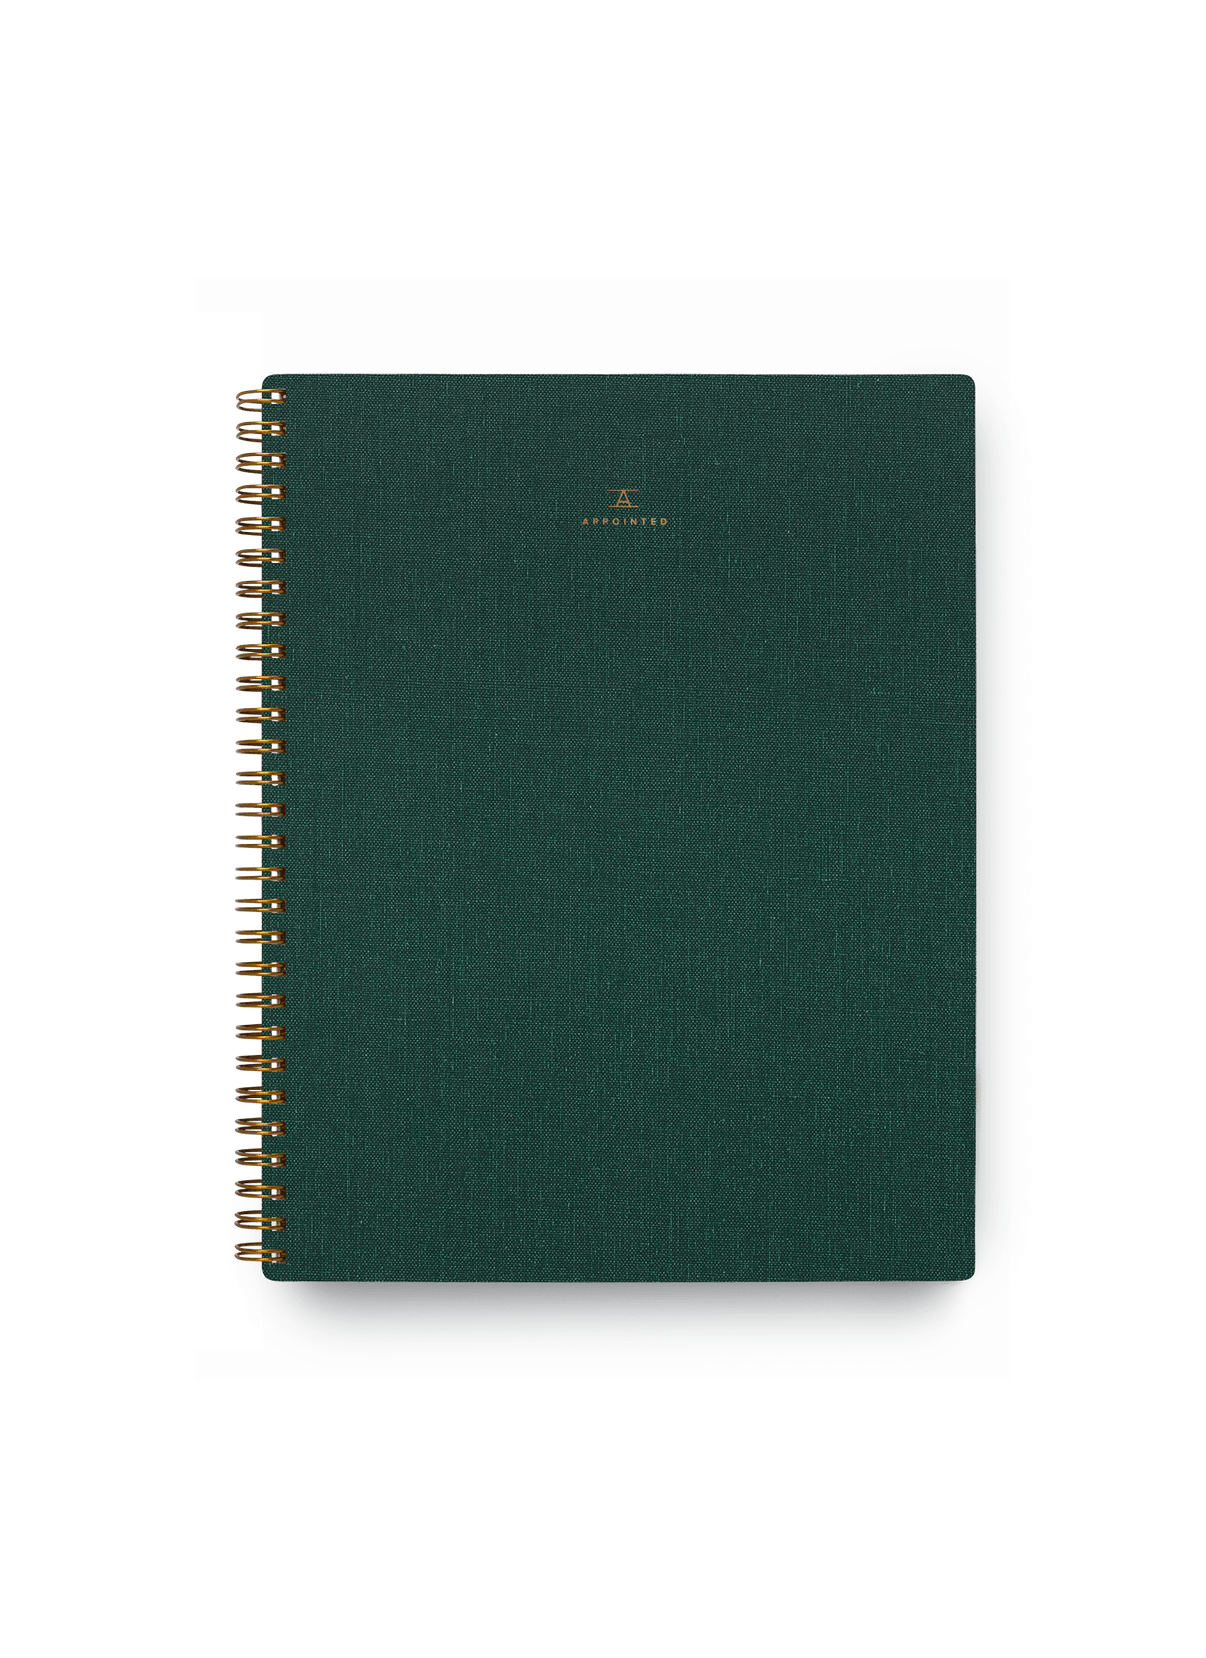 Appointed Notebook in Hunter Green bookcloth with brass wire-o binding front view || Hunter Green